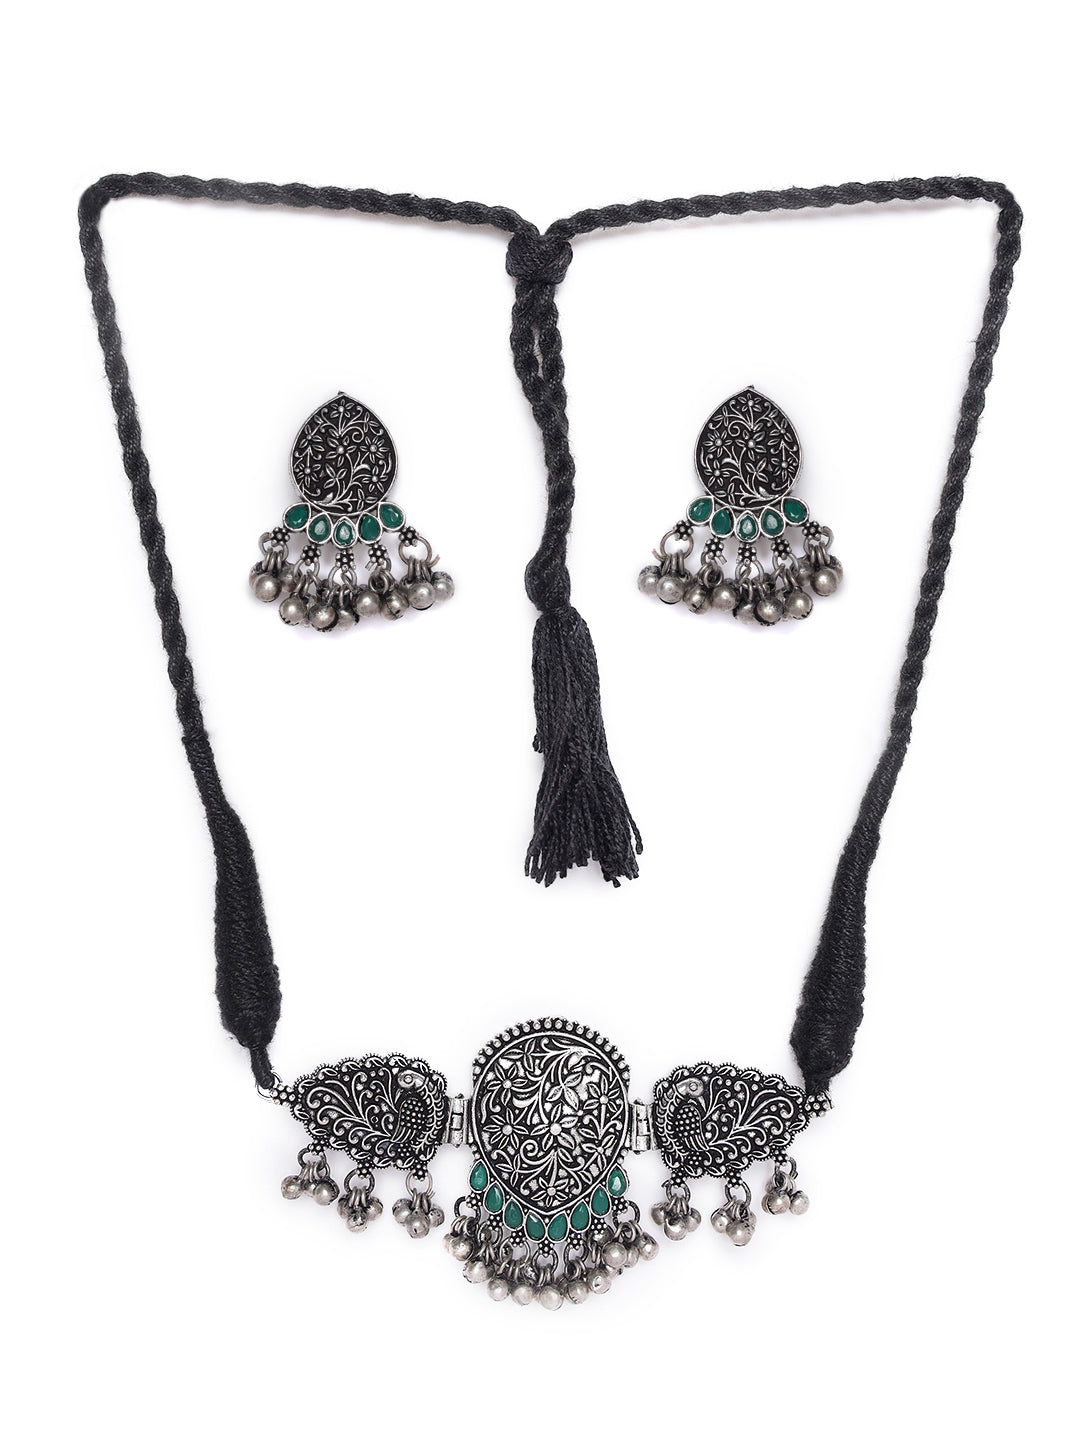 Oxidized Silver-Plated Green Stone-Studded & Beaded Handcrafted Peacock Shaped Jewelry Set - Jazzandsizzle